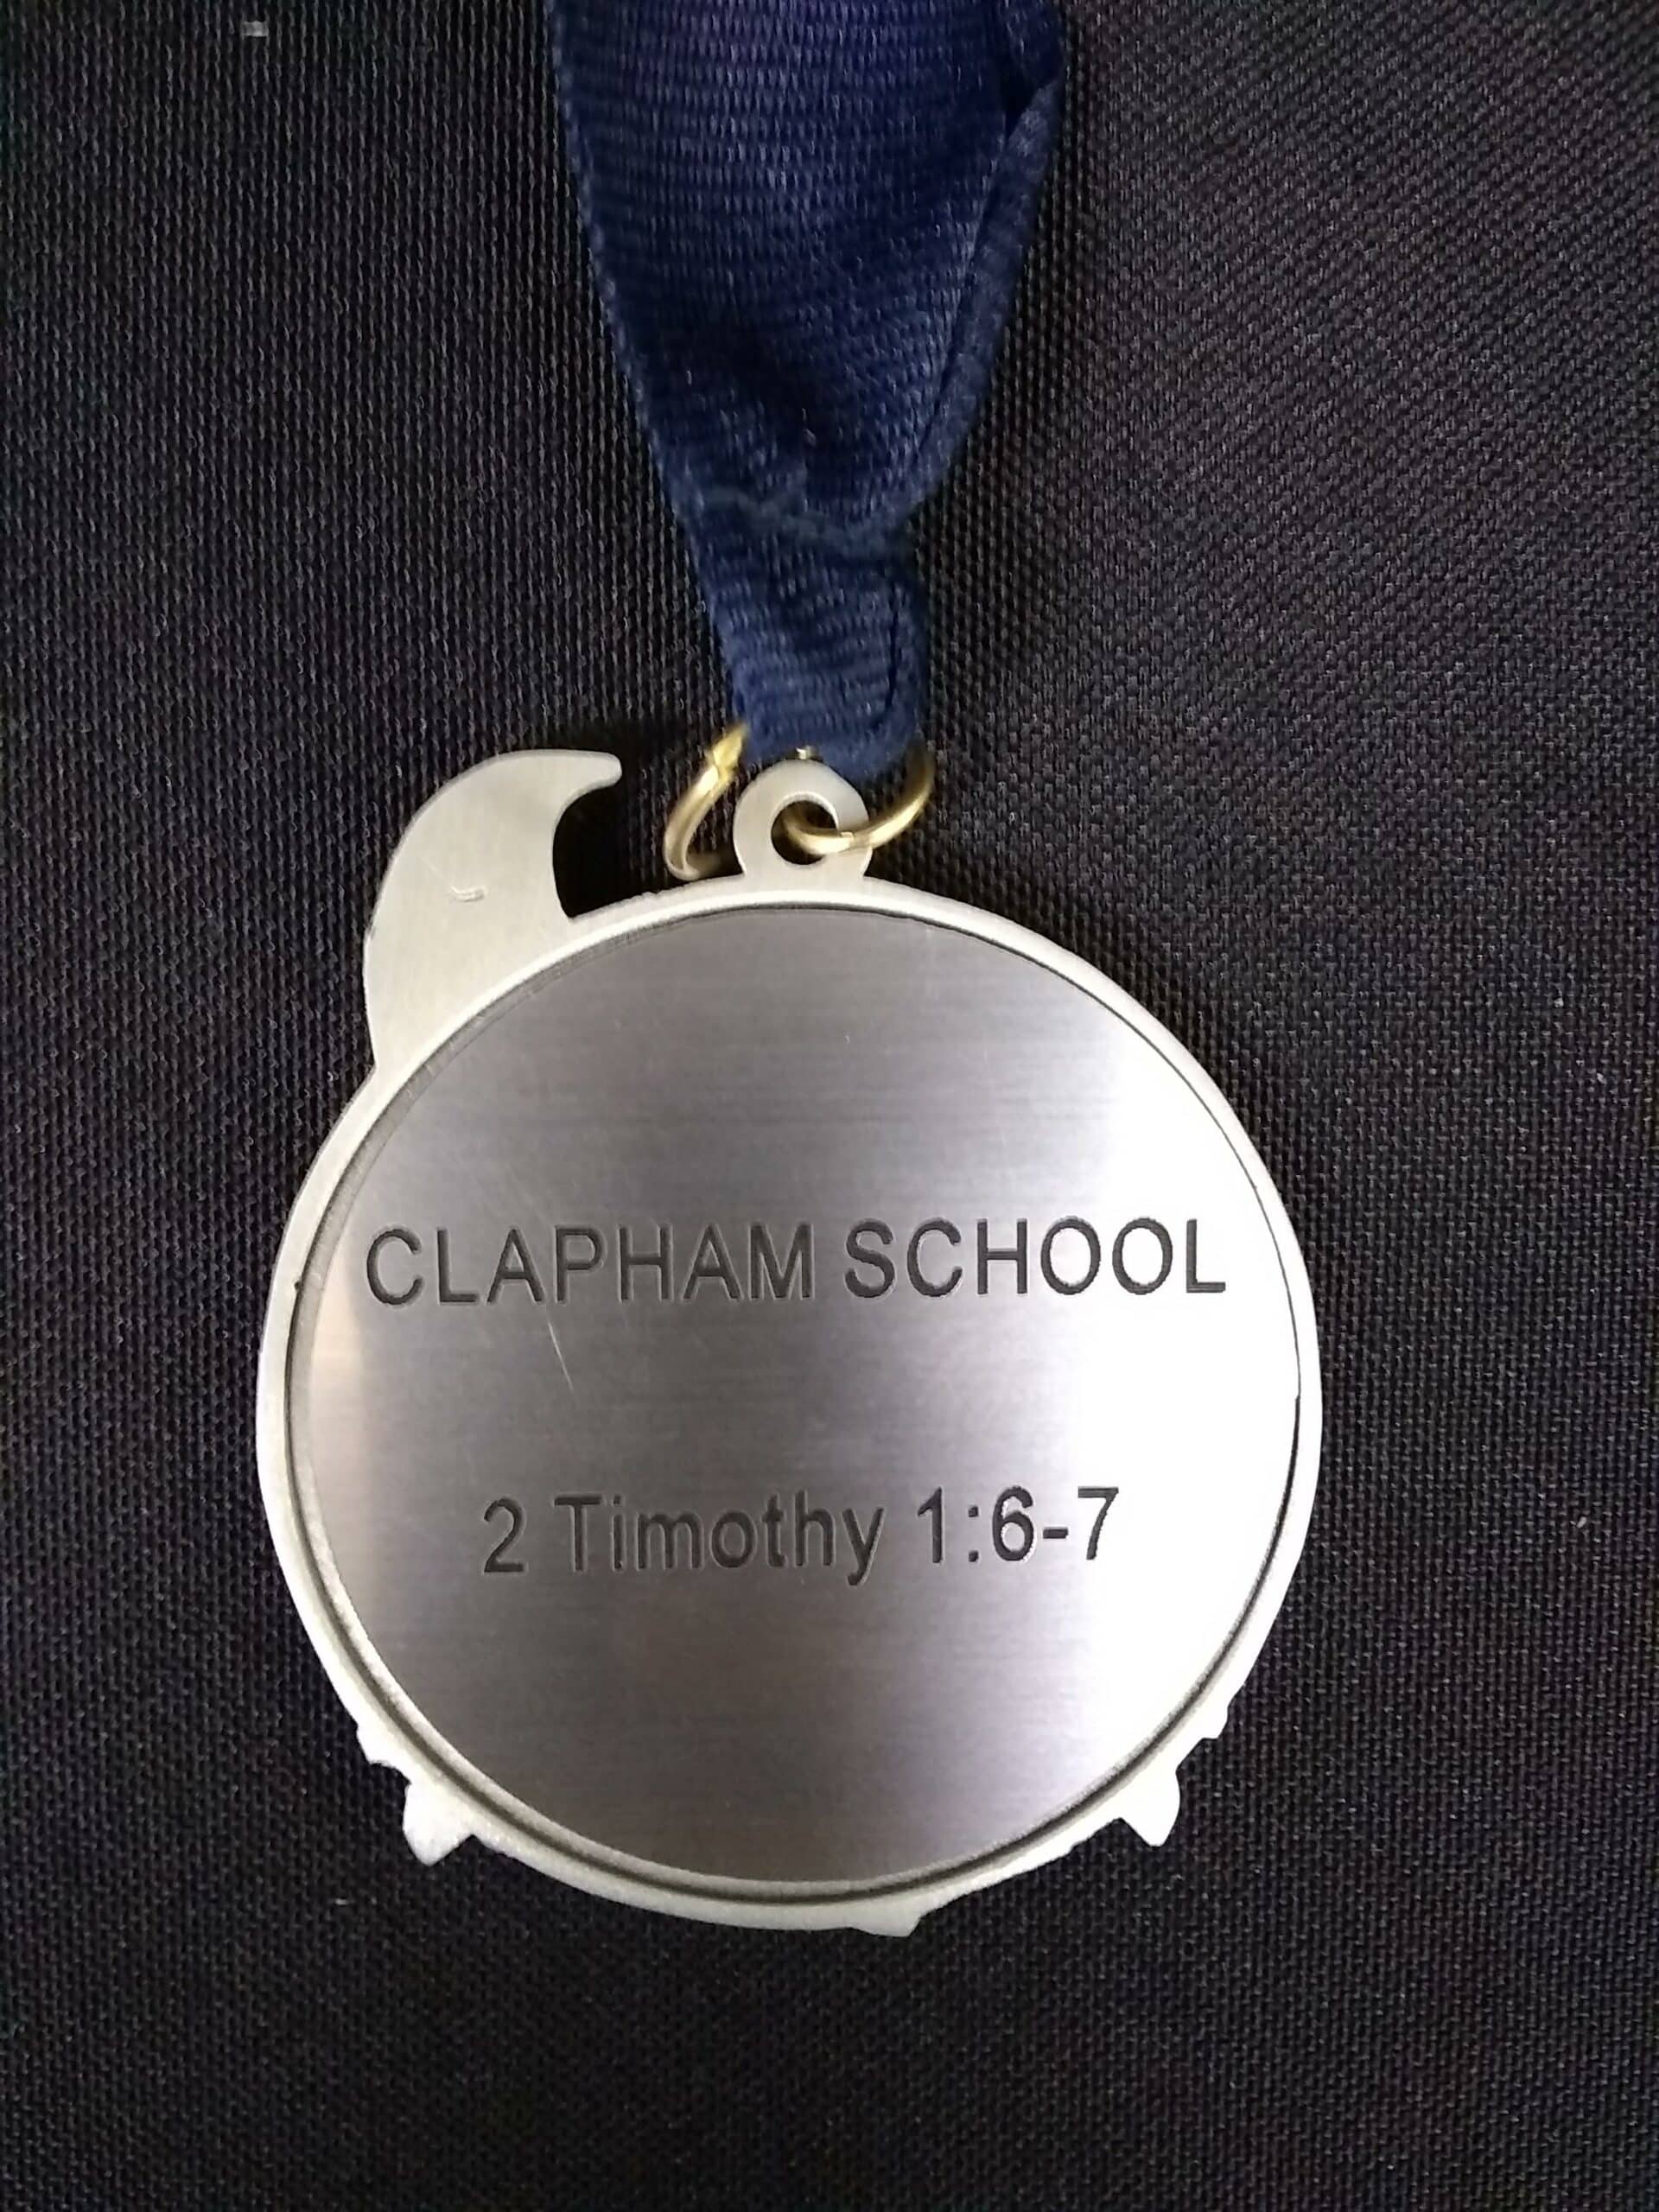 he Class 5 medal with an inscription of 2 Timothy 1:6-7